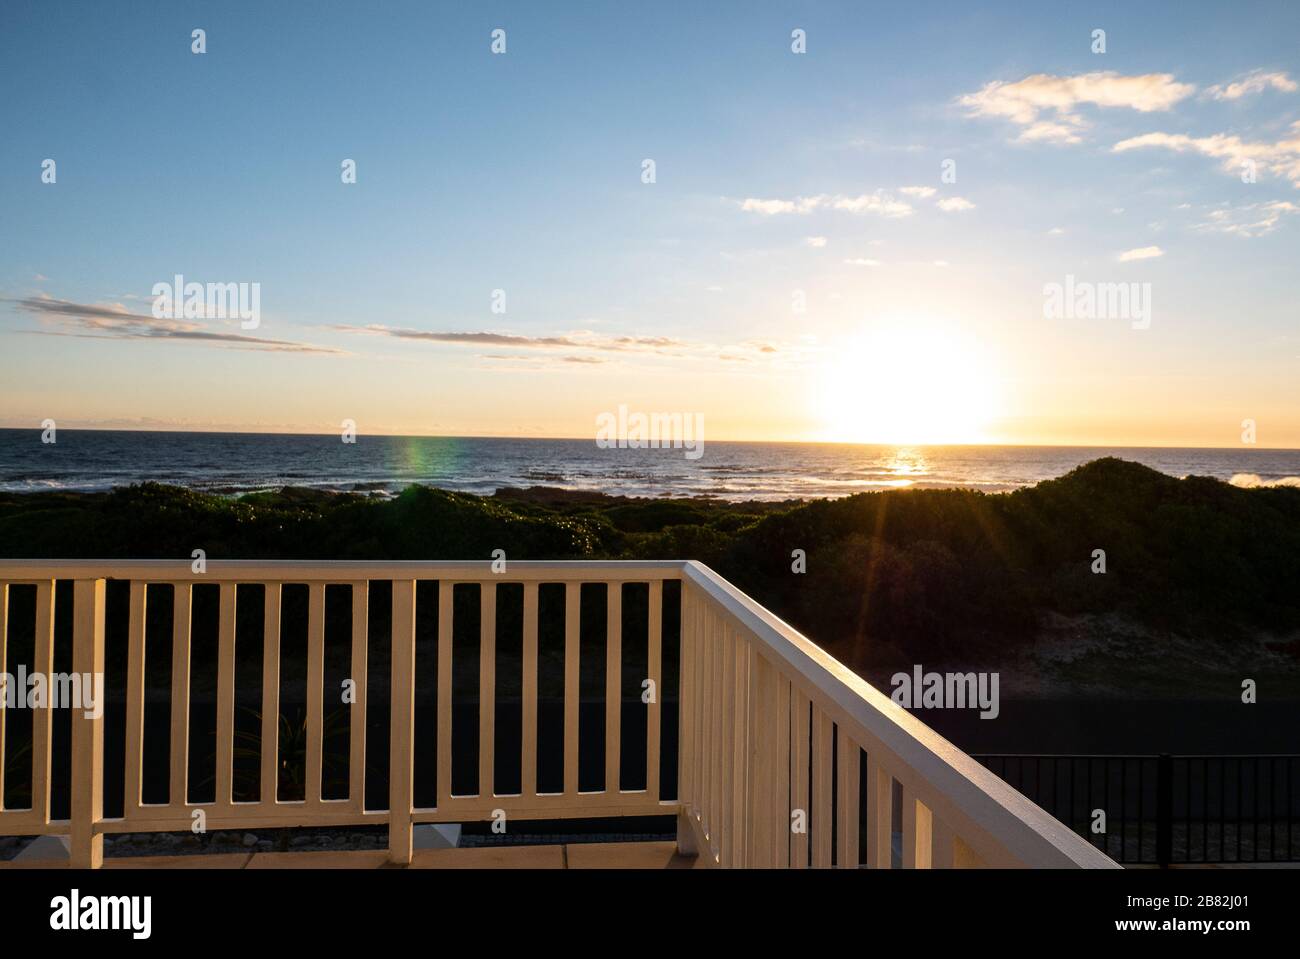 Balcony overlooking Beach at Sunset, Hermanus, Garden Route, South Africa Stock Photo